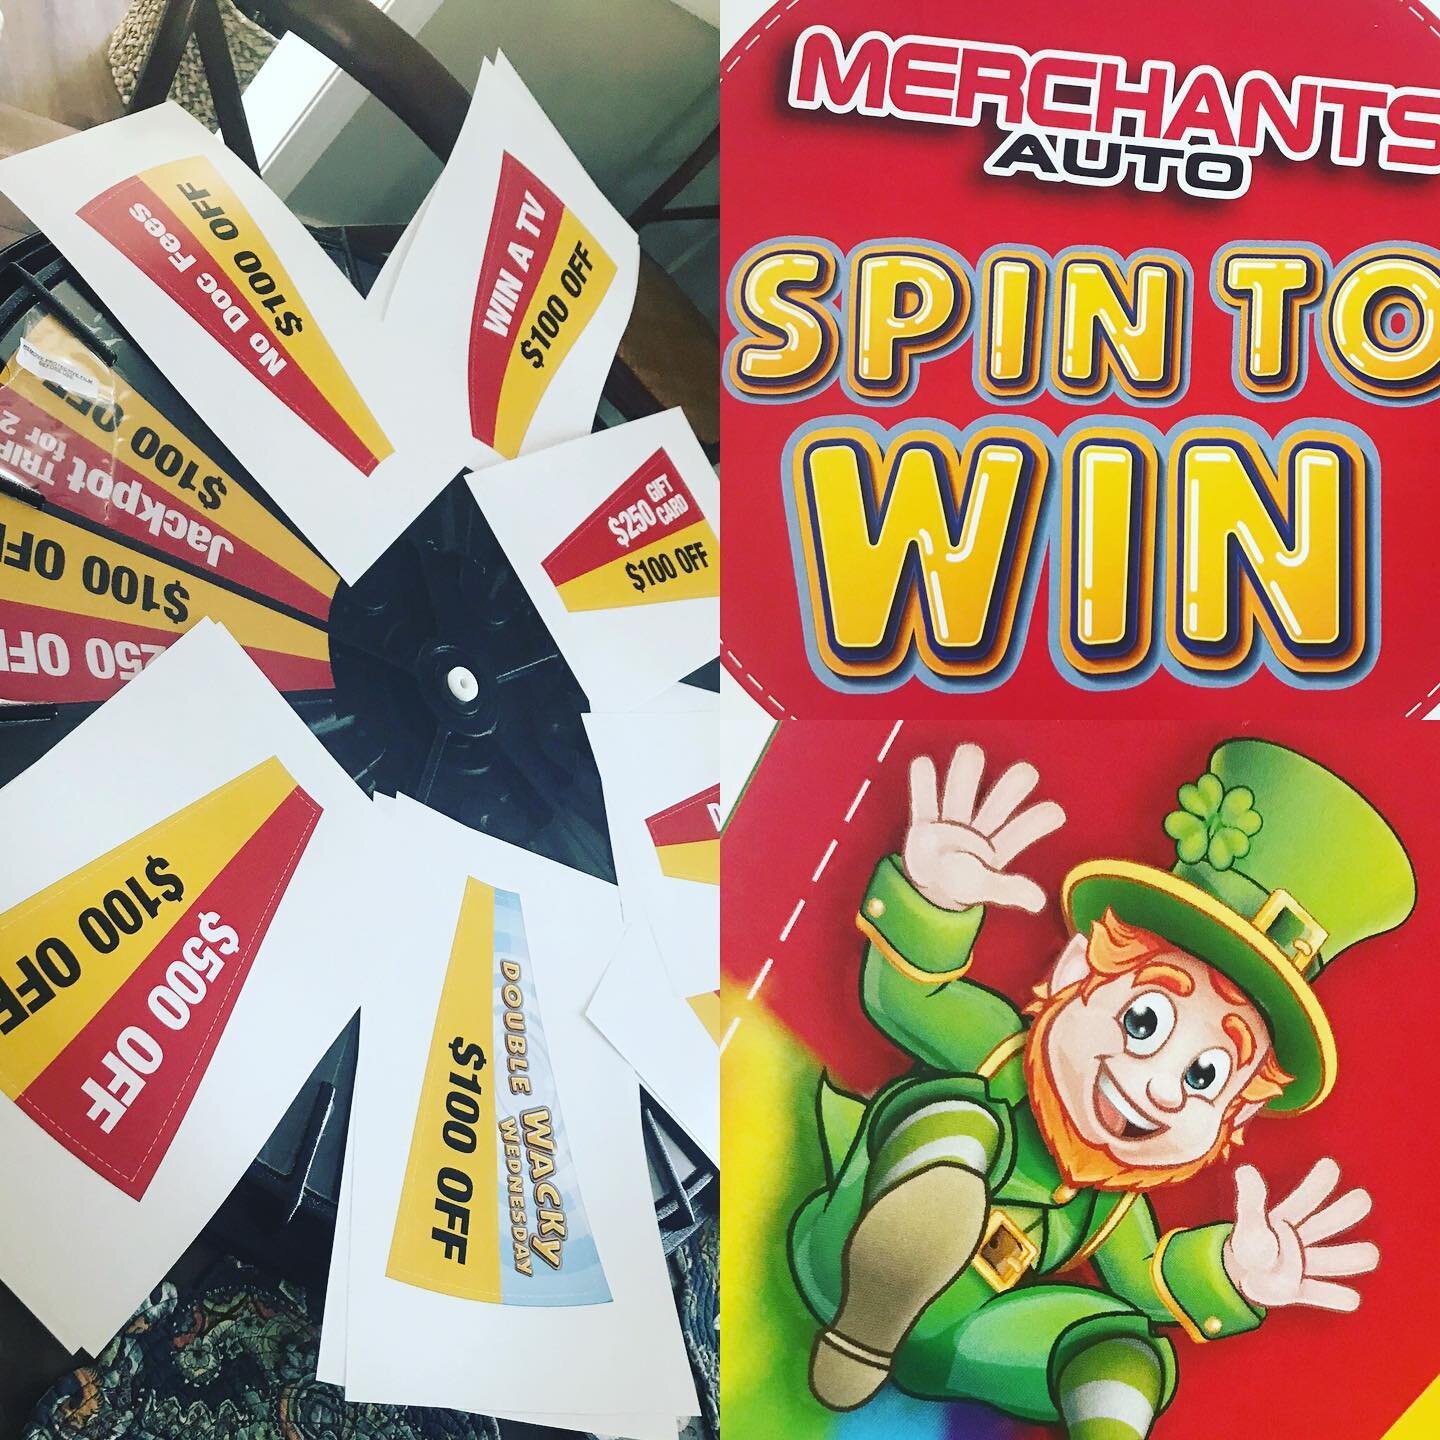 A little arts &amp; crafts project on the deck today, getting prepped for crazy February sales with an interactive prize spinner for the showroom. #carguys #michellelambertcreative #creativeeveryday #merchantssellscars